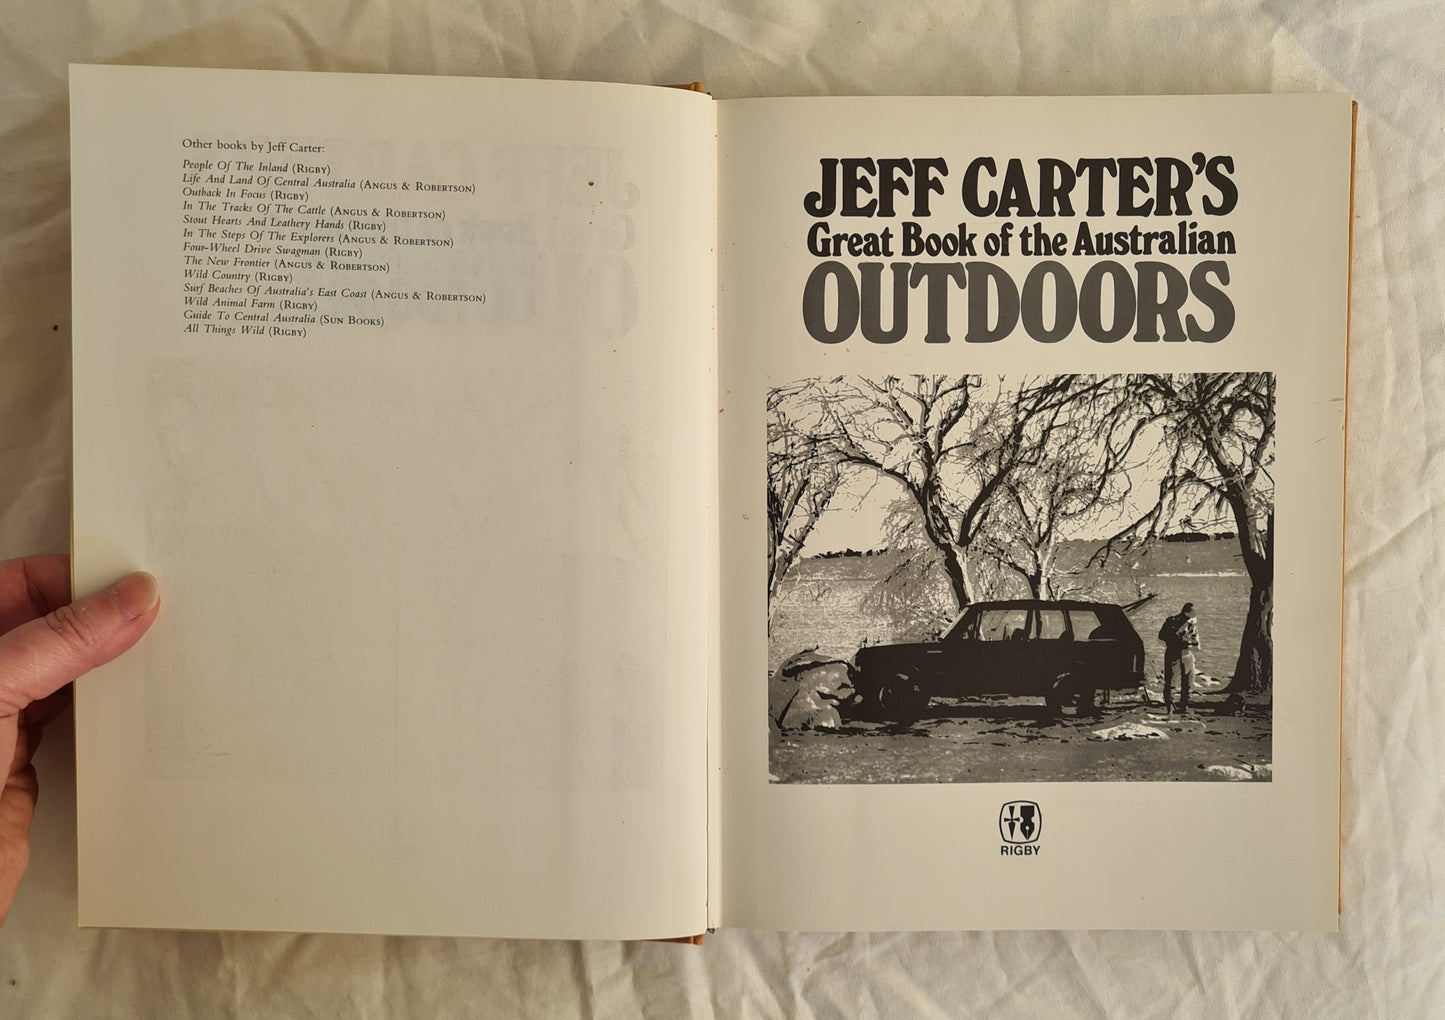 Jeff Carter’s Great Book of the Australian Outdoors  by Jeff Carter